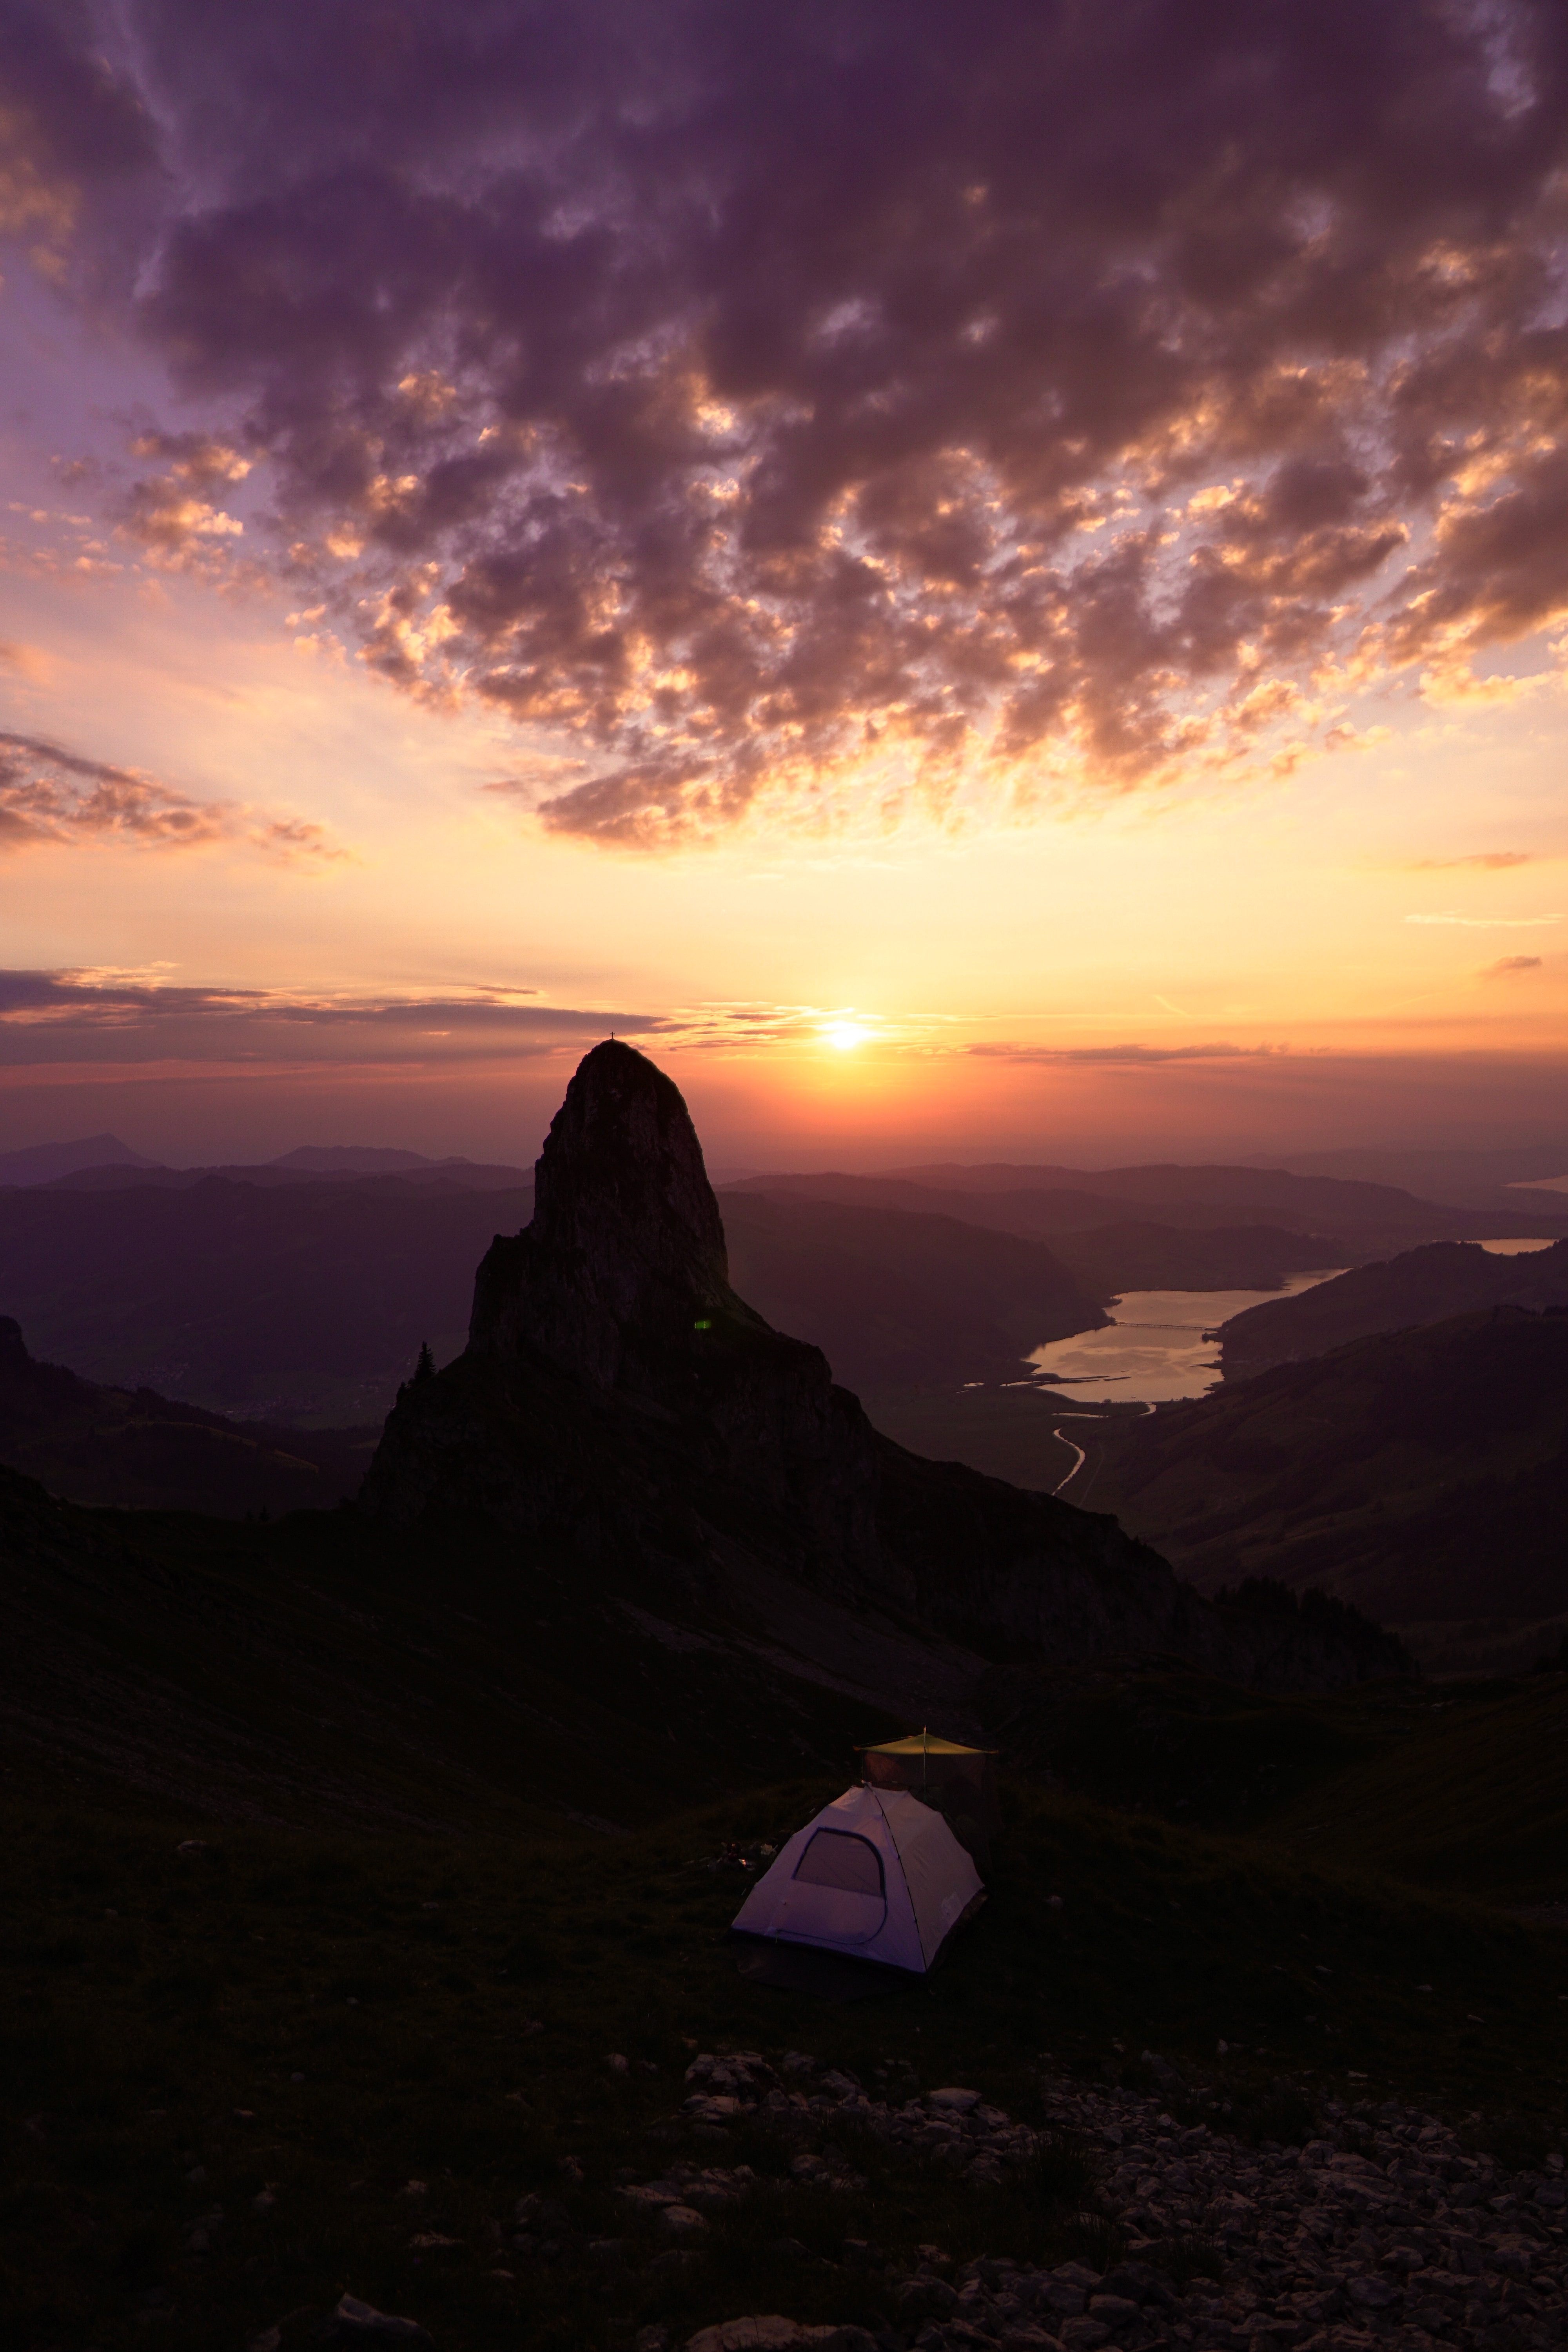 nature, sunset, mountains, tent, camping, campsite